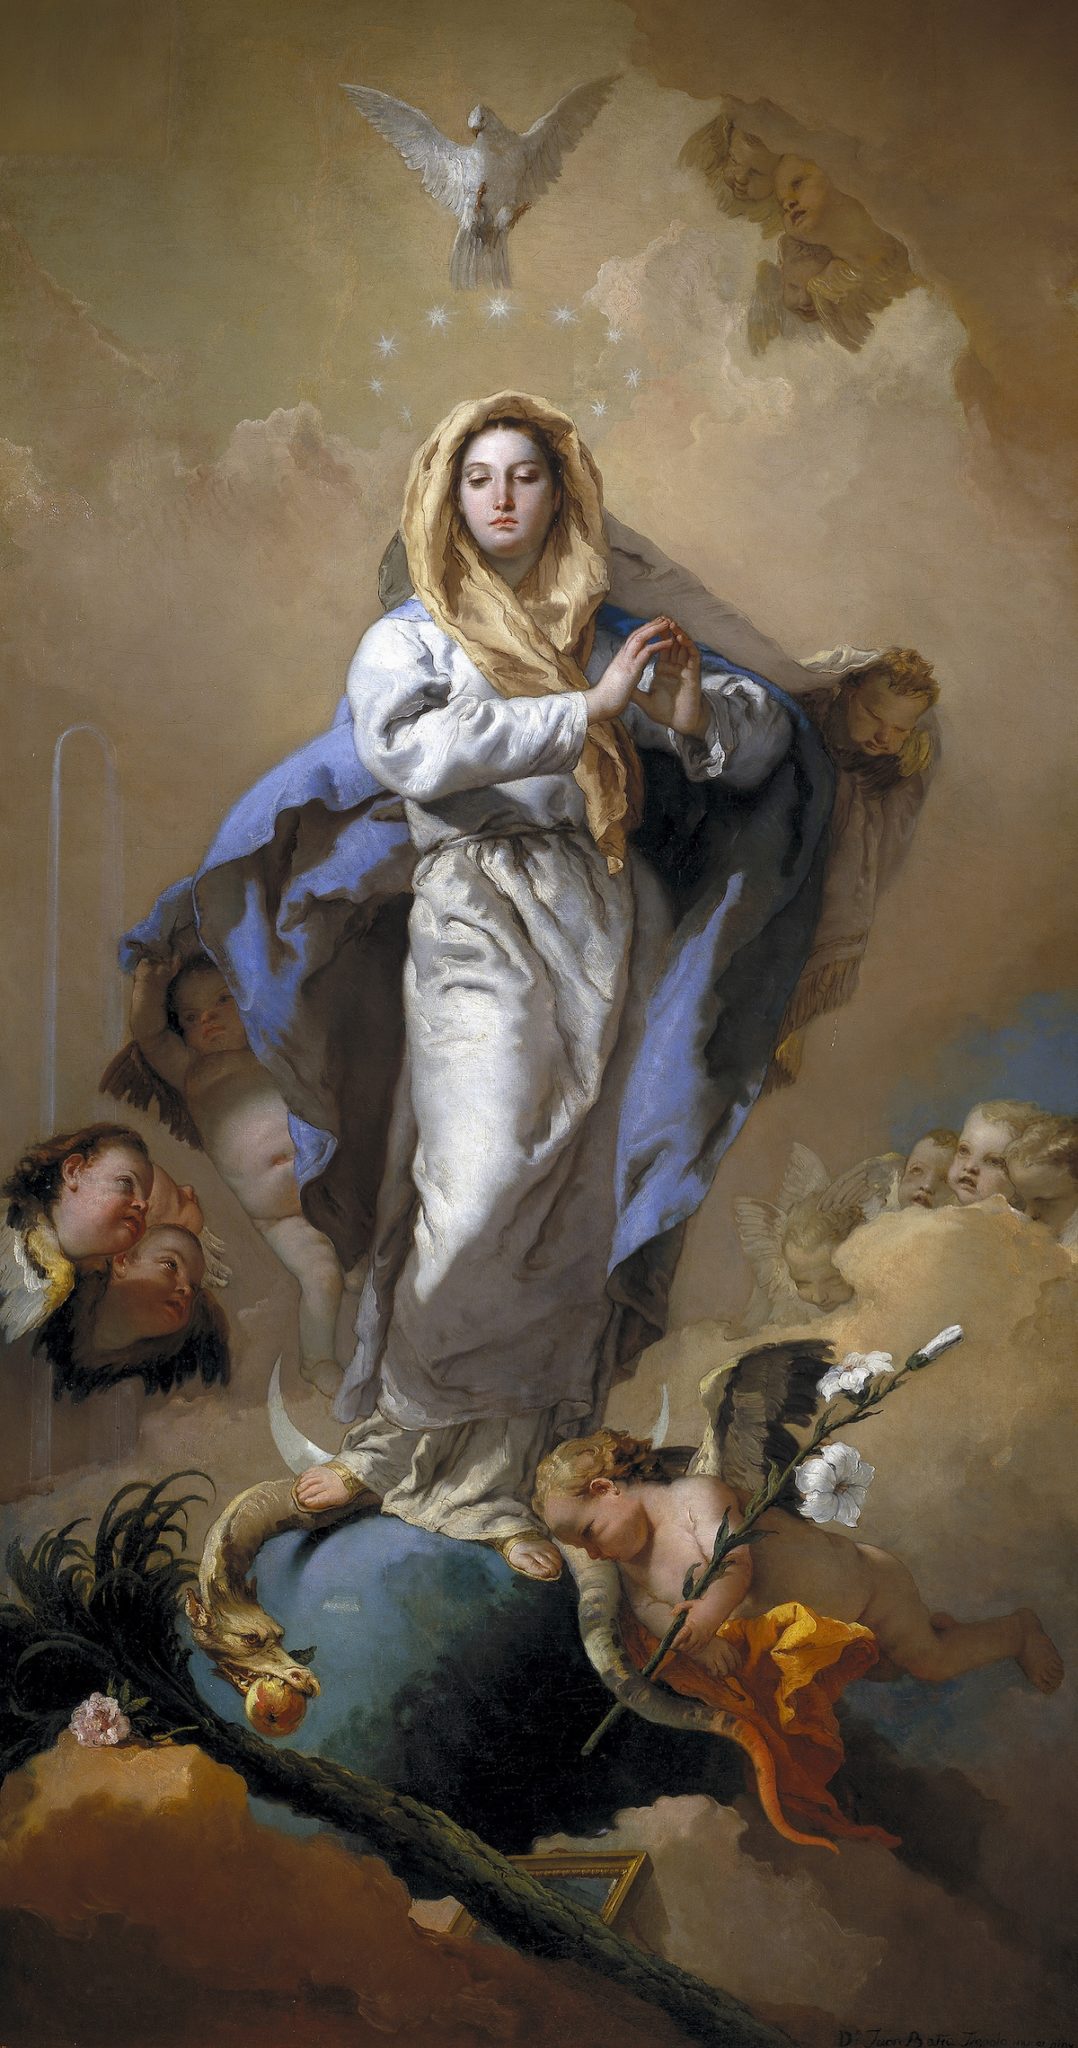 Oil on canvas painting of the Virgin Mary surrounded by angels